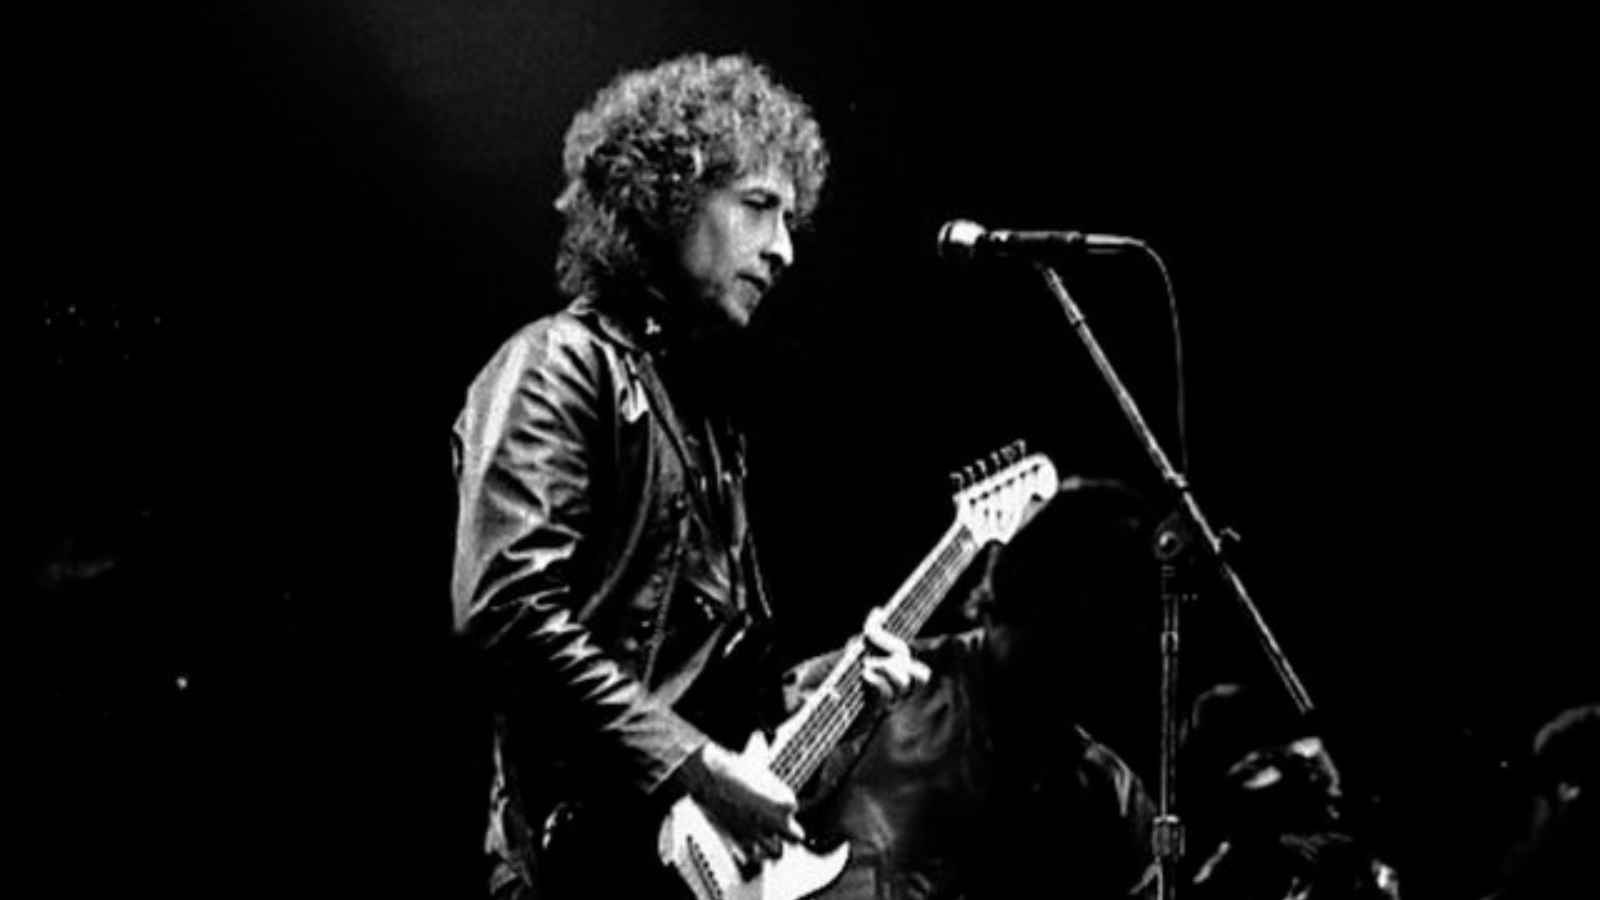 <p>Although numerous artists have put their own spin on this song, from Adele to Garth Brooks, it’s the original version by Bob Dylan that still holds a special place in the hearts of many.</p><p>The poetic and heart-wrenching lyrics will leave you feeling overwhelmed with emotions, particularly lines such as “I could make you happy, make your dreams come true/Nothing that I wouldn’t do.” Dylan’s version is a stunning testament to the power of love and unwavering devotion.</p>